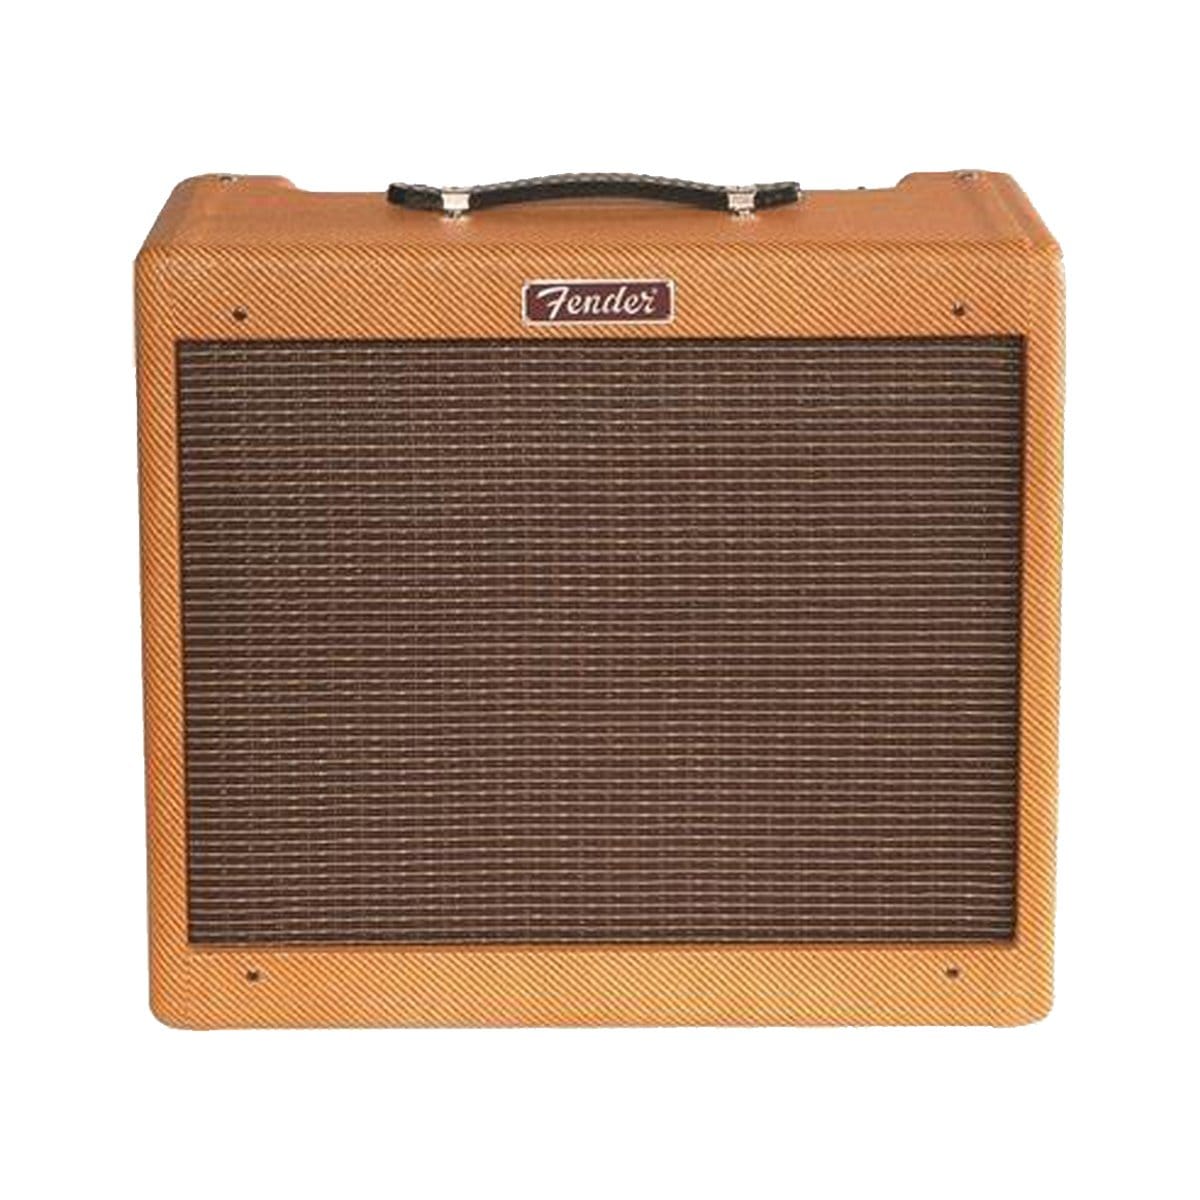 Fender Amps Fender Blues Junior III Lacquered Tweed Guitar Amp - Byron Music